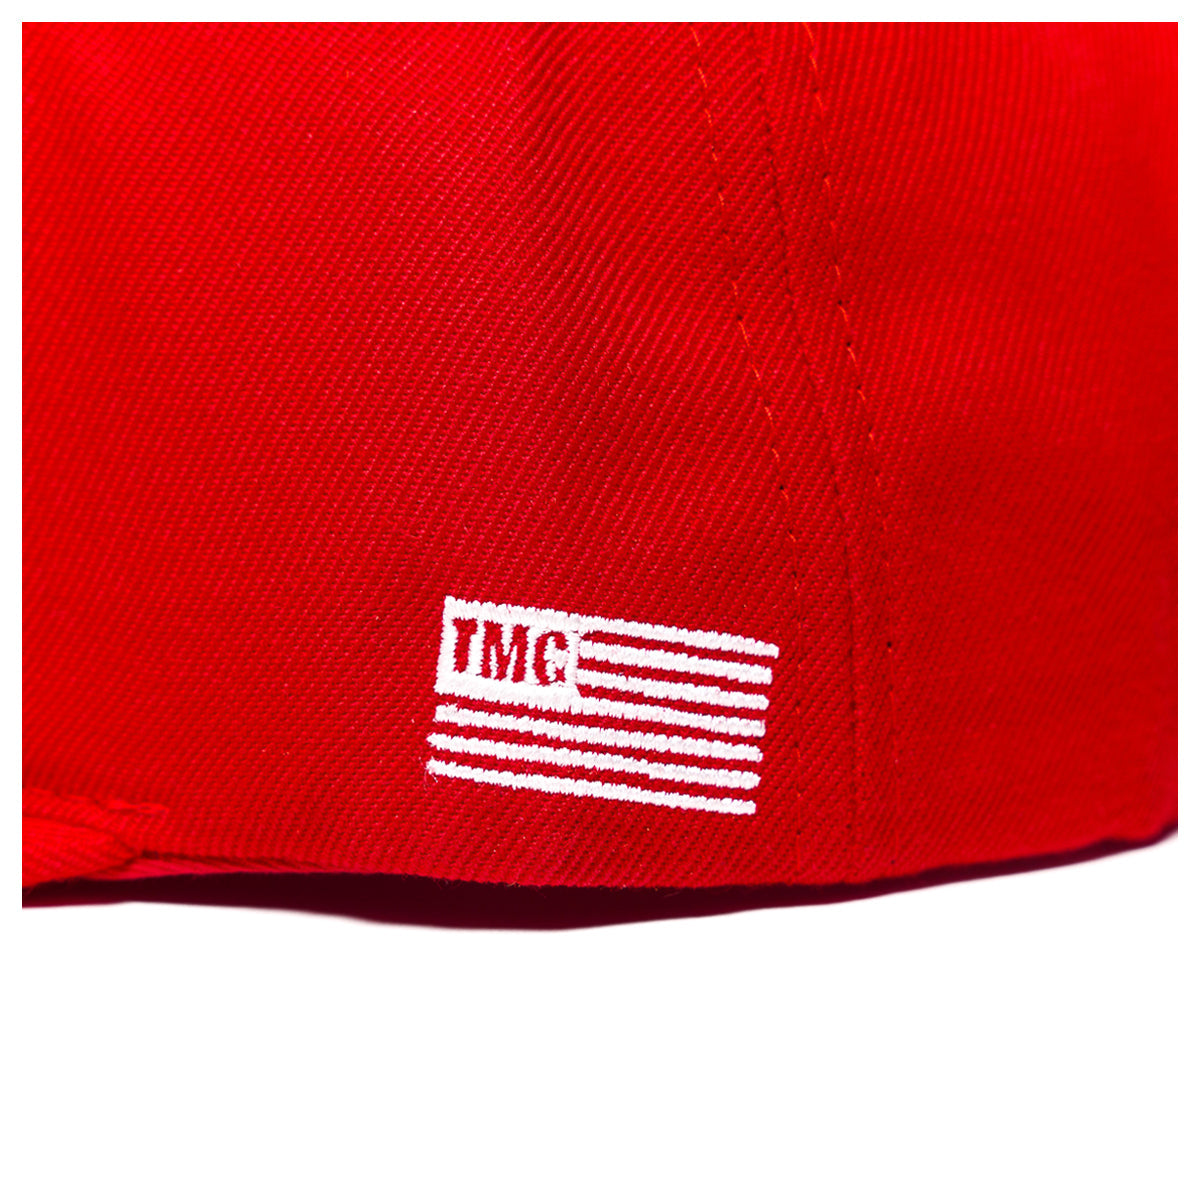 Victory Limited Edition Snapback - Red/White